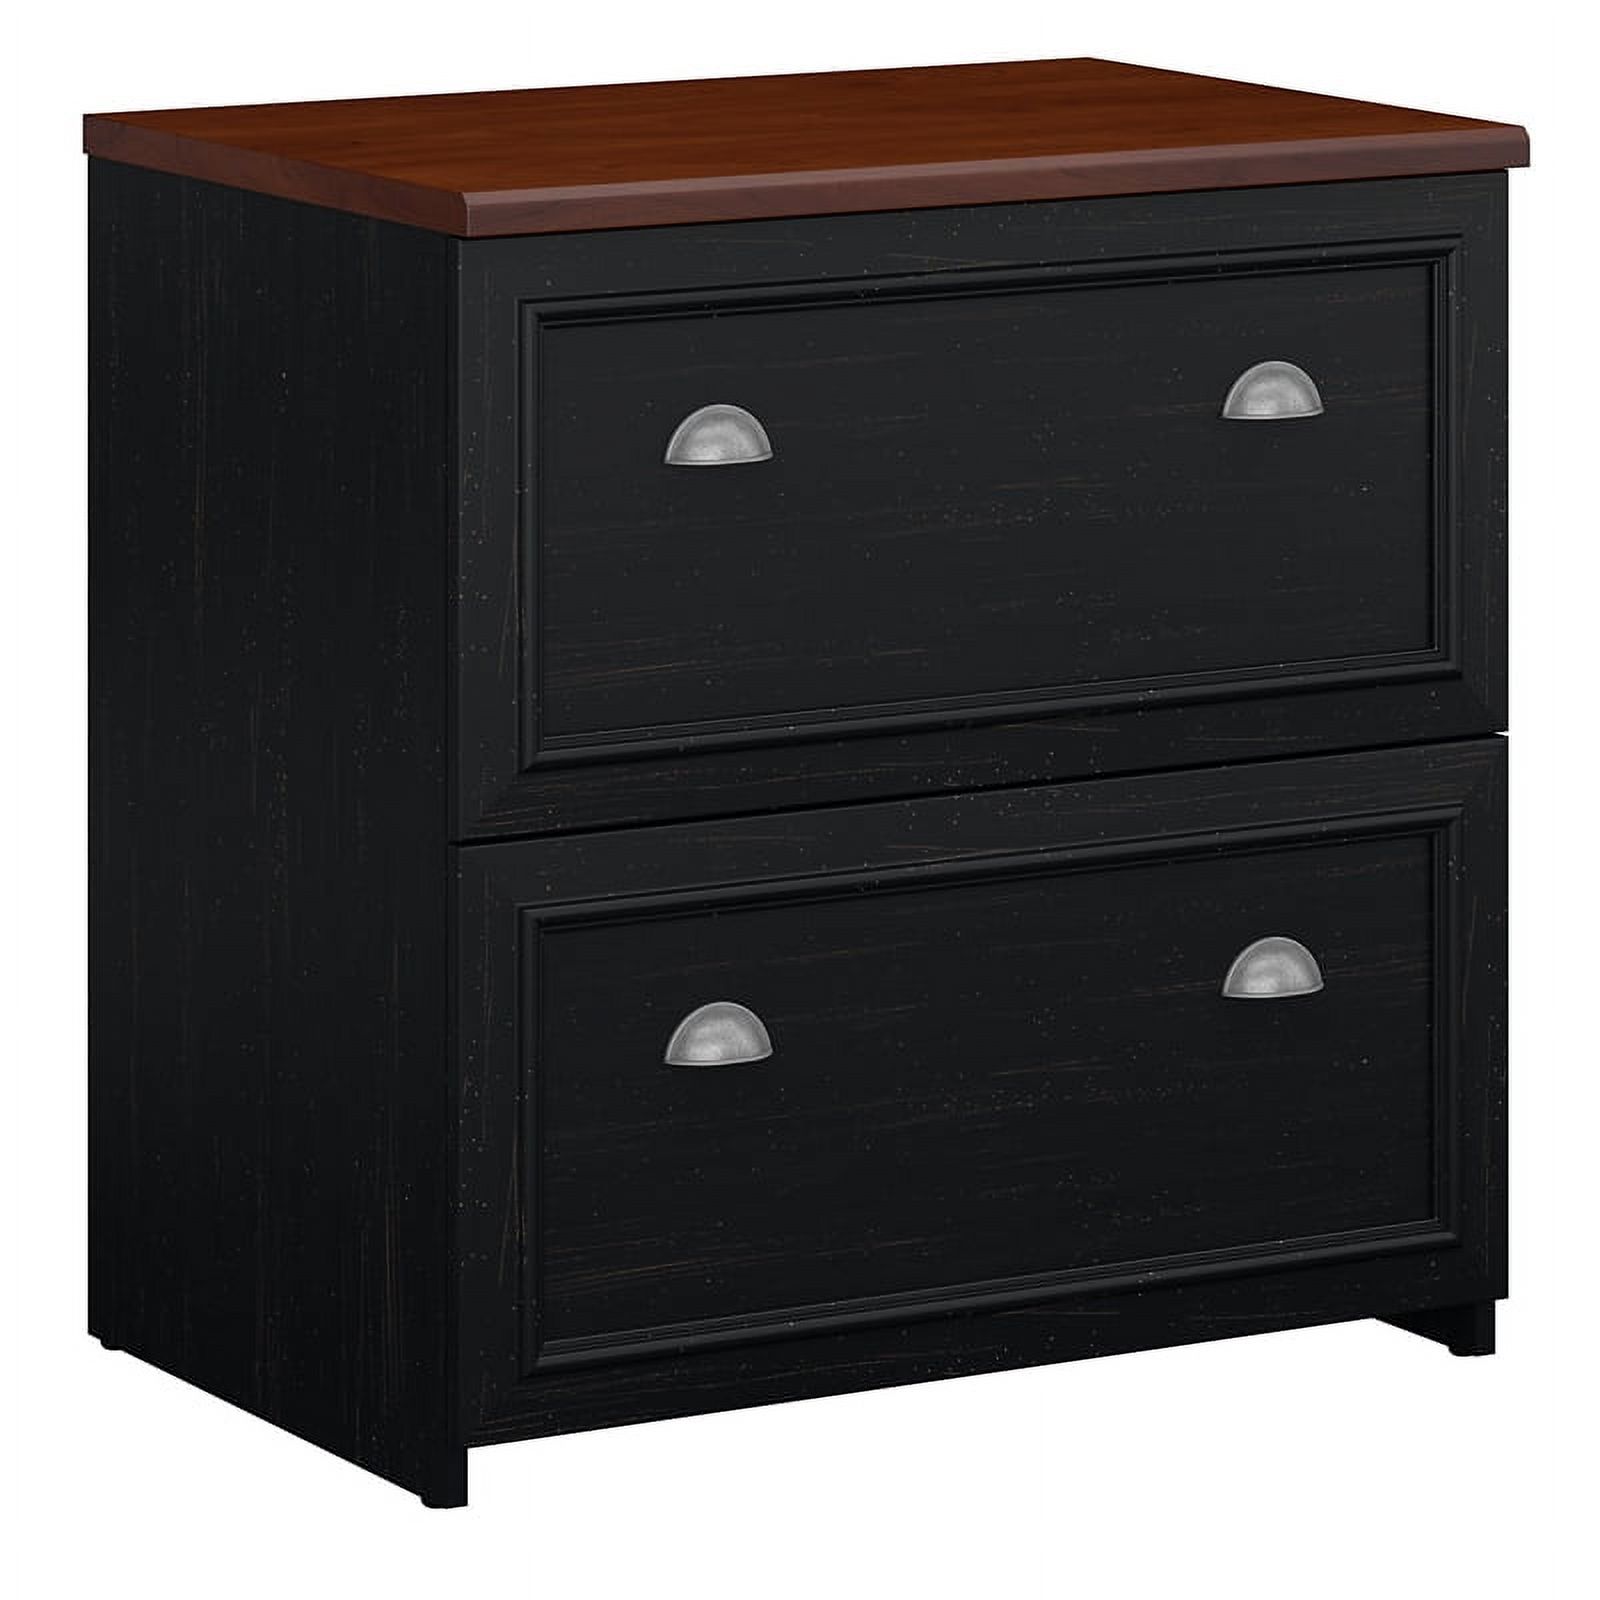 Home Square 2 Piece Engineered Wood Filing Cabinet Set in Antique Black - image 2 of 7